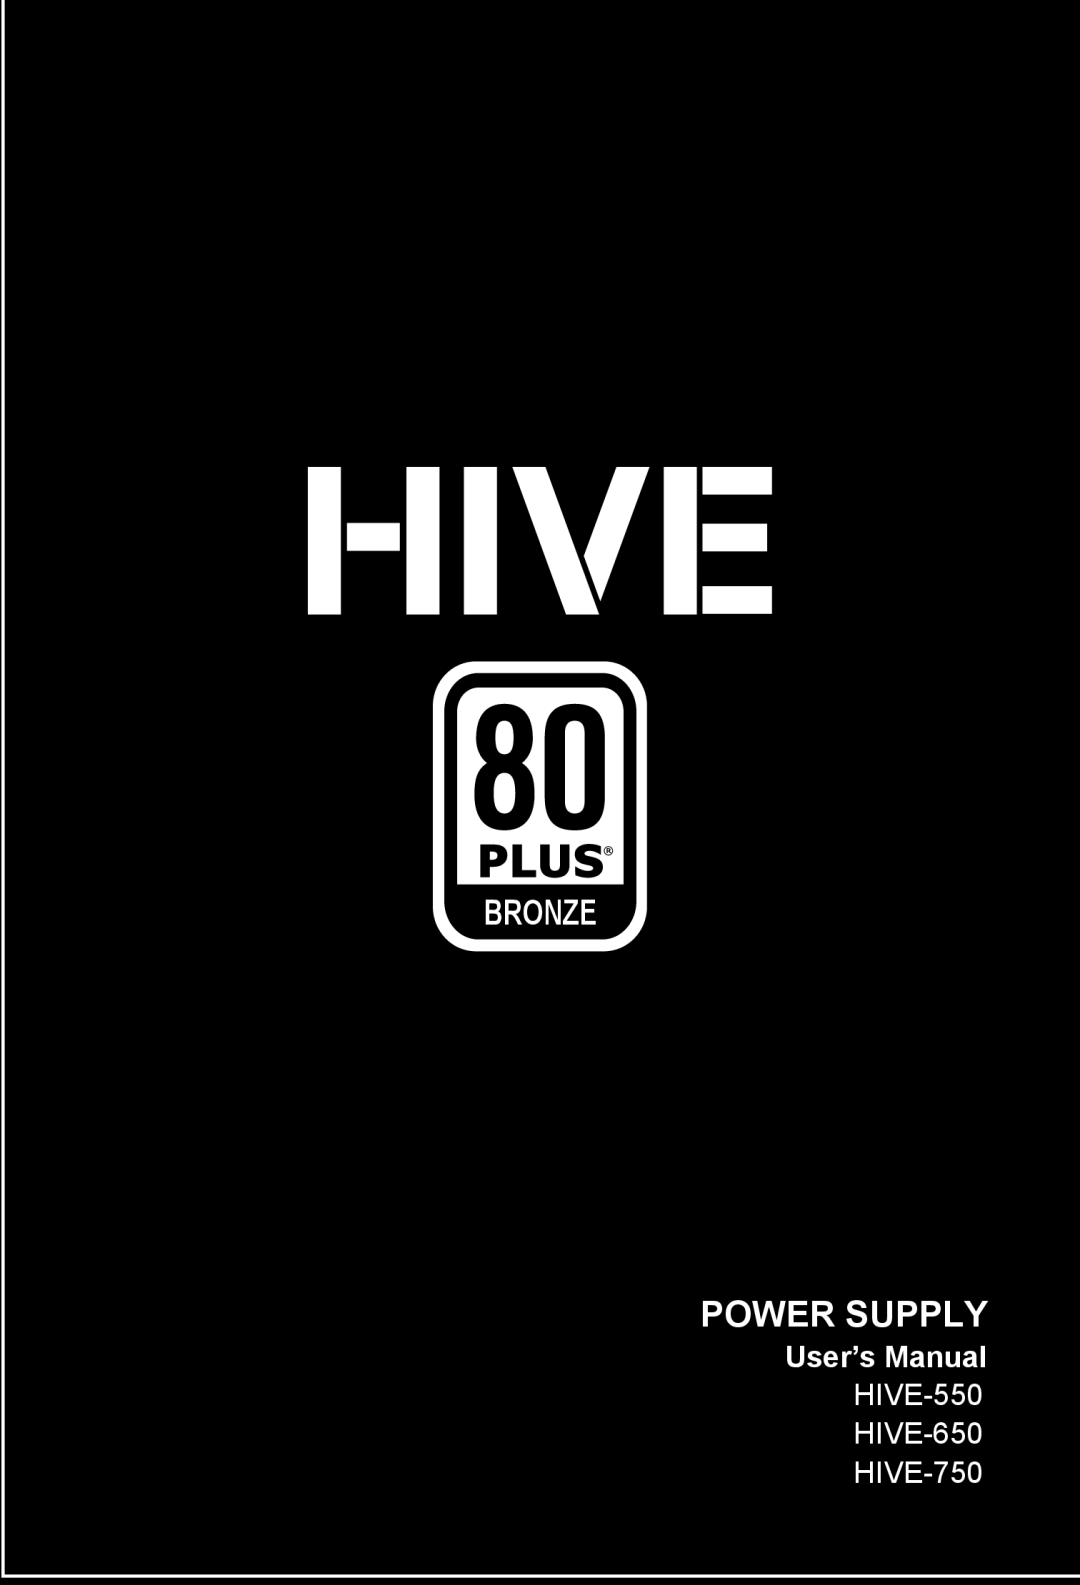 Rosewill HIVE-550, HIVE-650, HIVE-750 user manual Information, Power Supply 